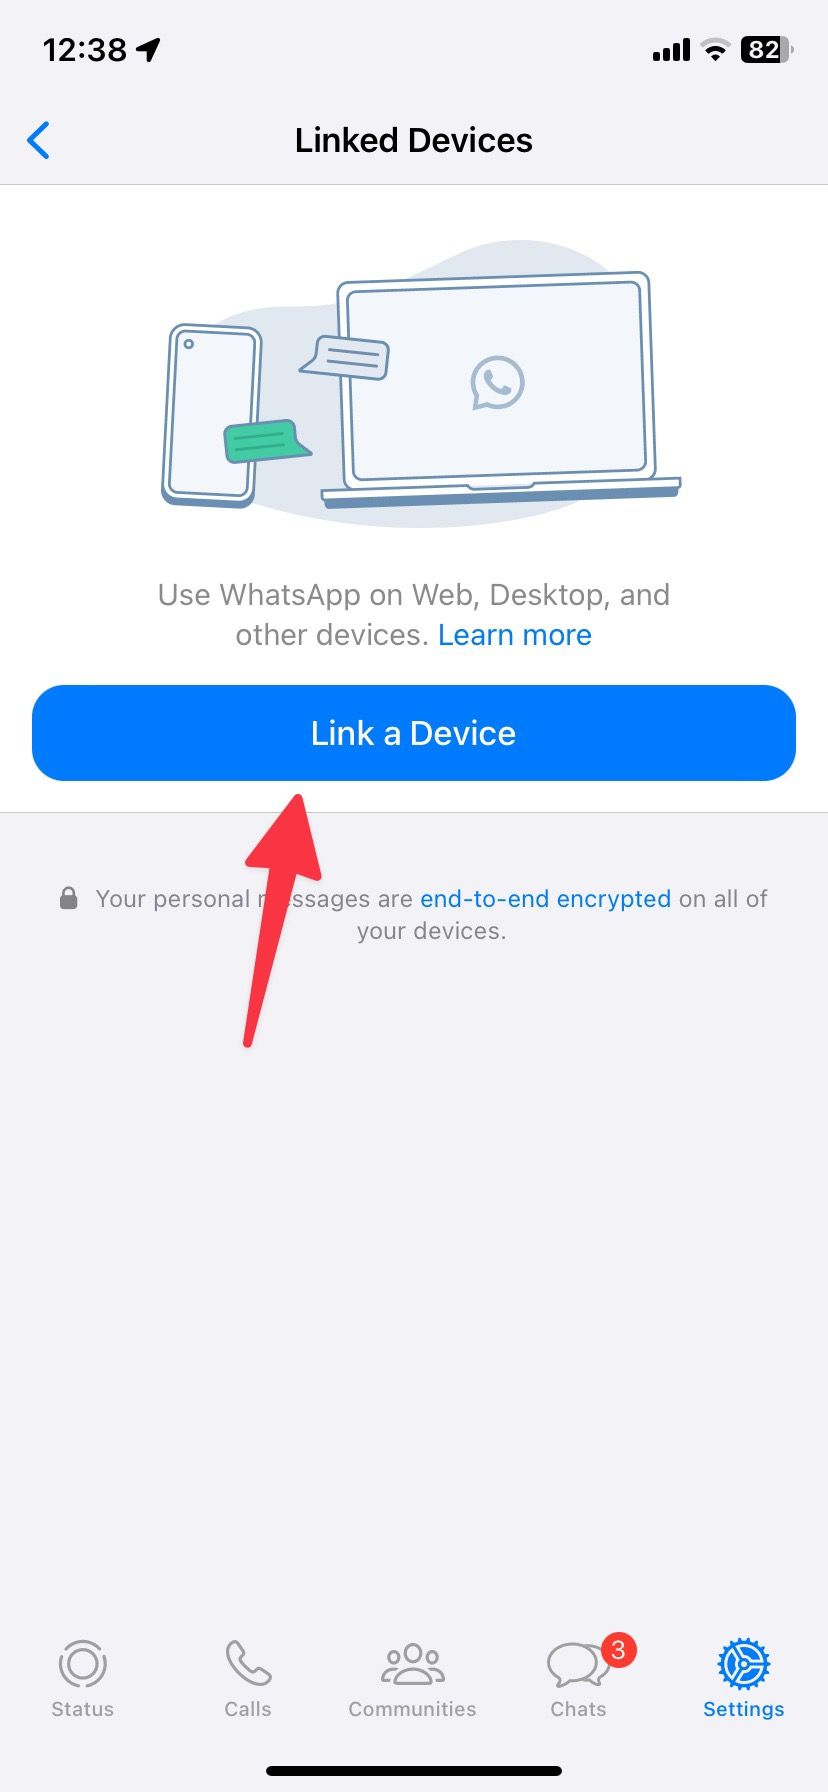 Pair a device on WhatsApp for iPhone